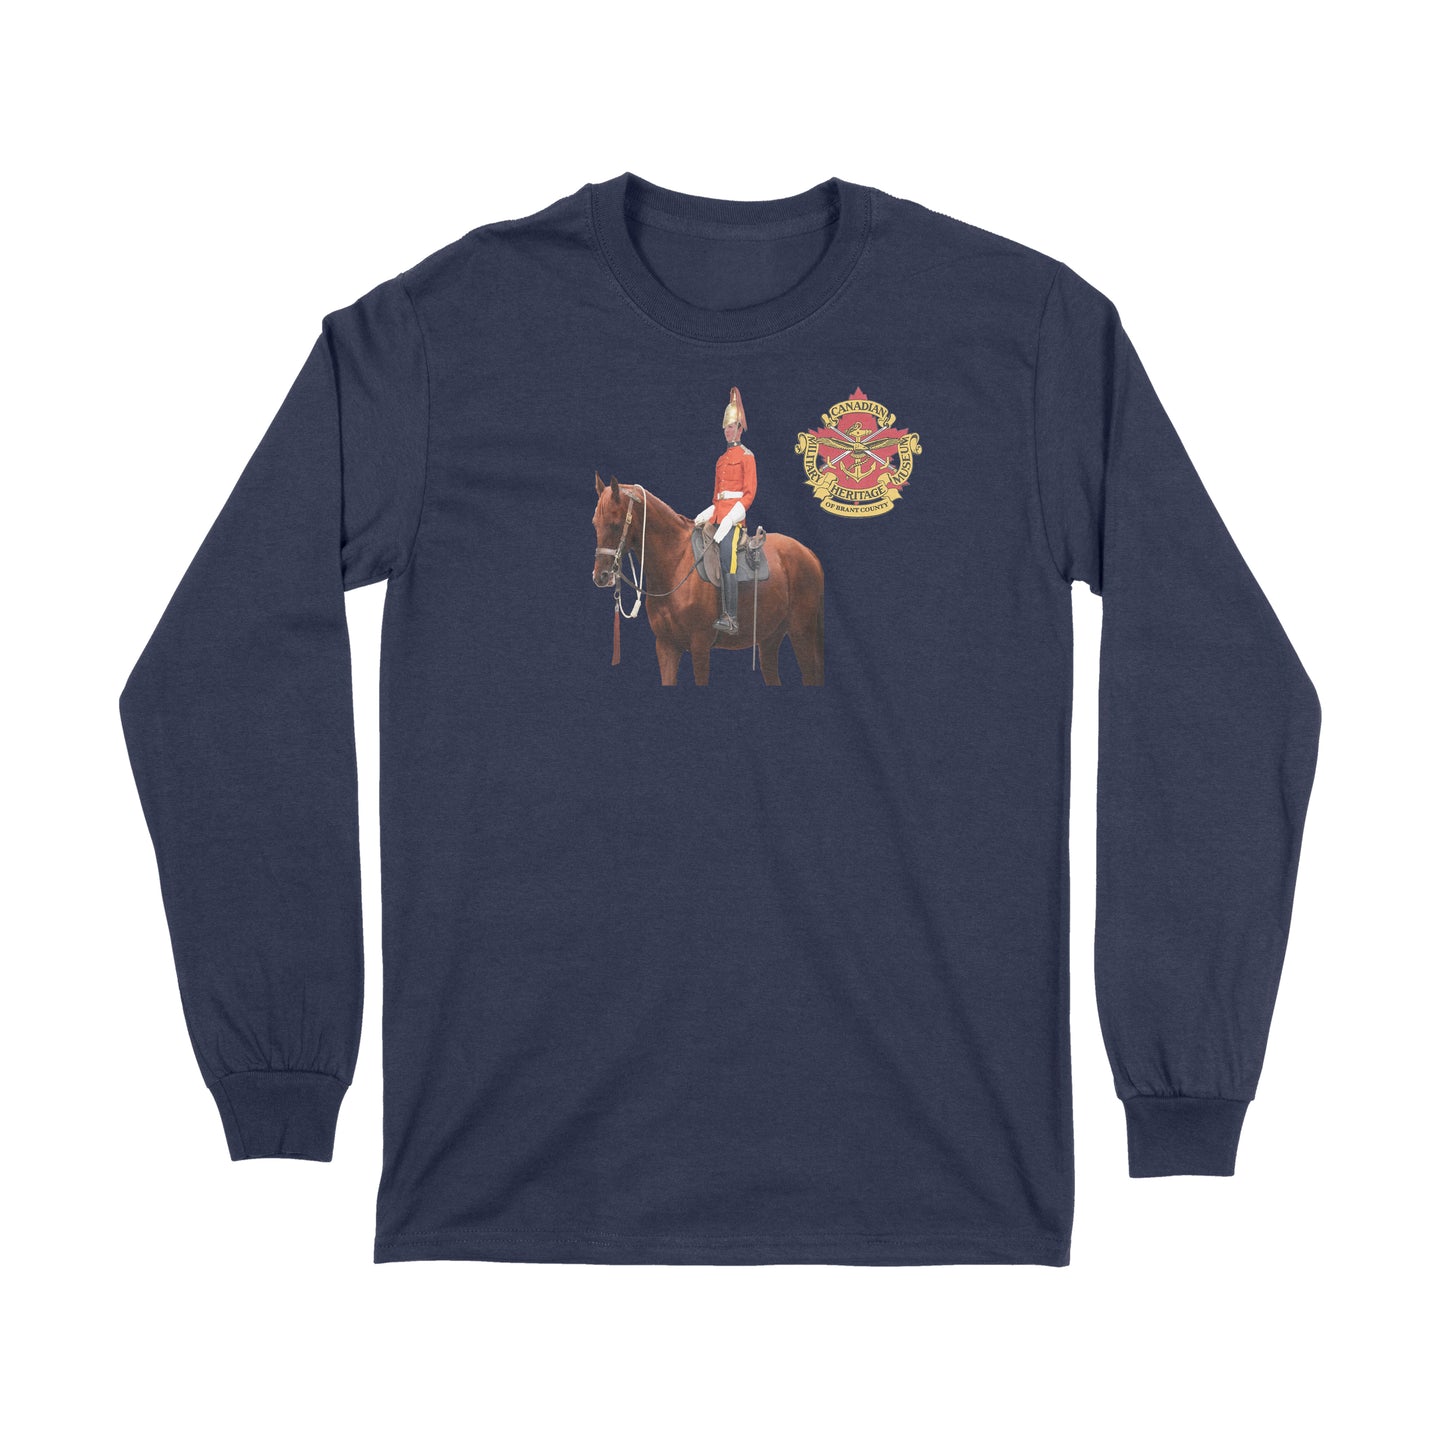 Brantford, Canadian Military Heritage Museum, Fat Dave, Long Sleeve, Mounted Dragoon, Museum, Navy Blue